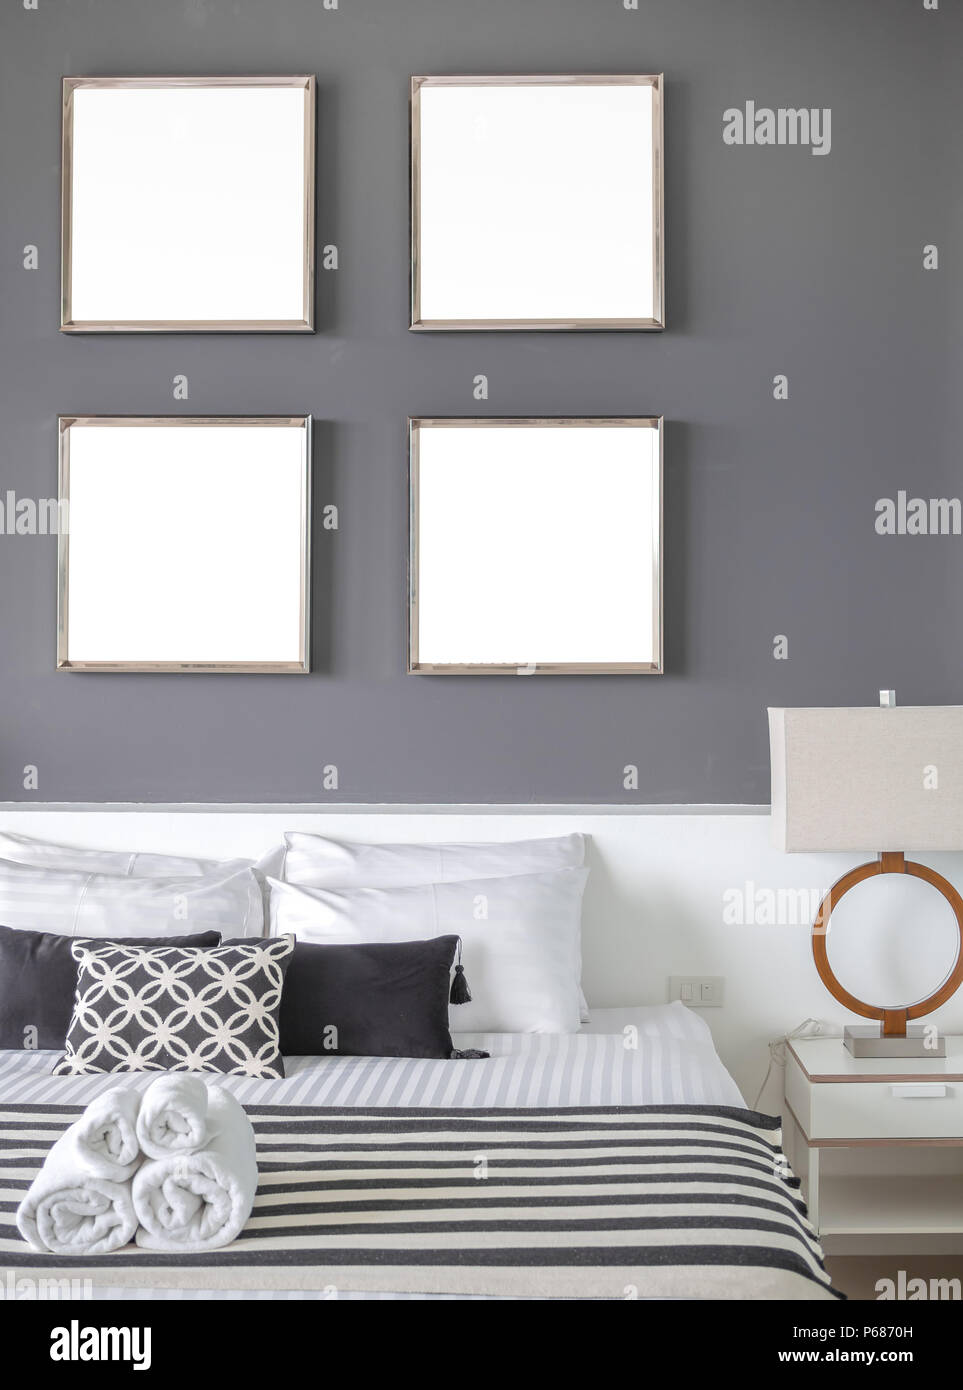 Modern Bedroom with Four Square Blank Stainless Steel Frames on The Gray Wall Interior, Pillows and Towels on The Bed with Side Lamp. Stock Photo